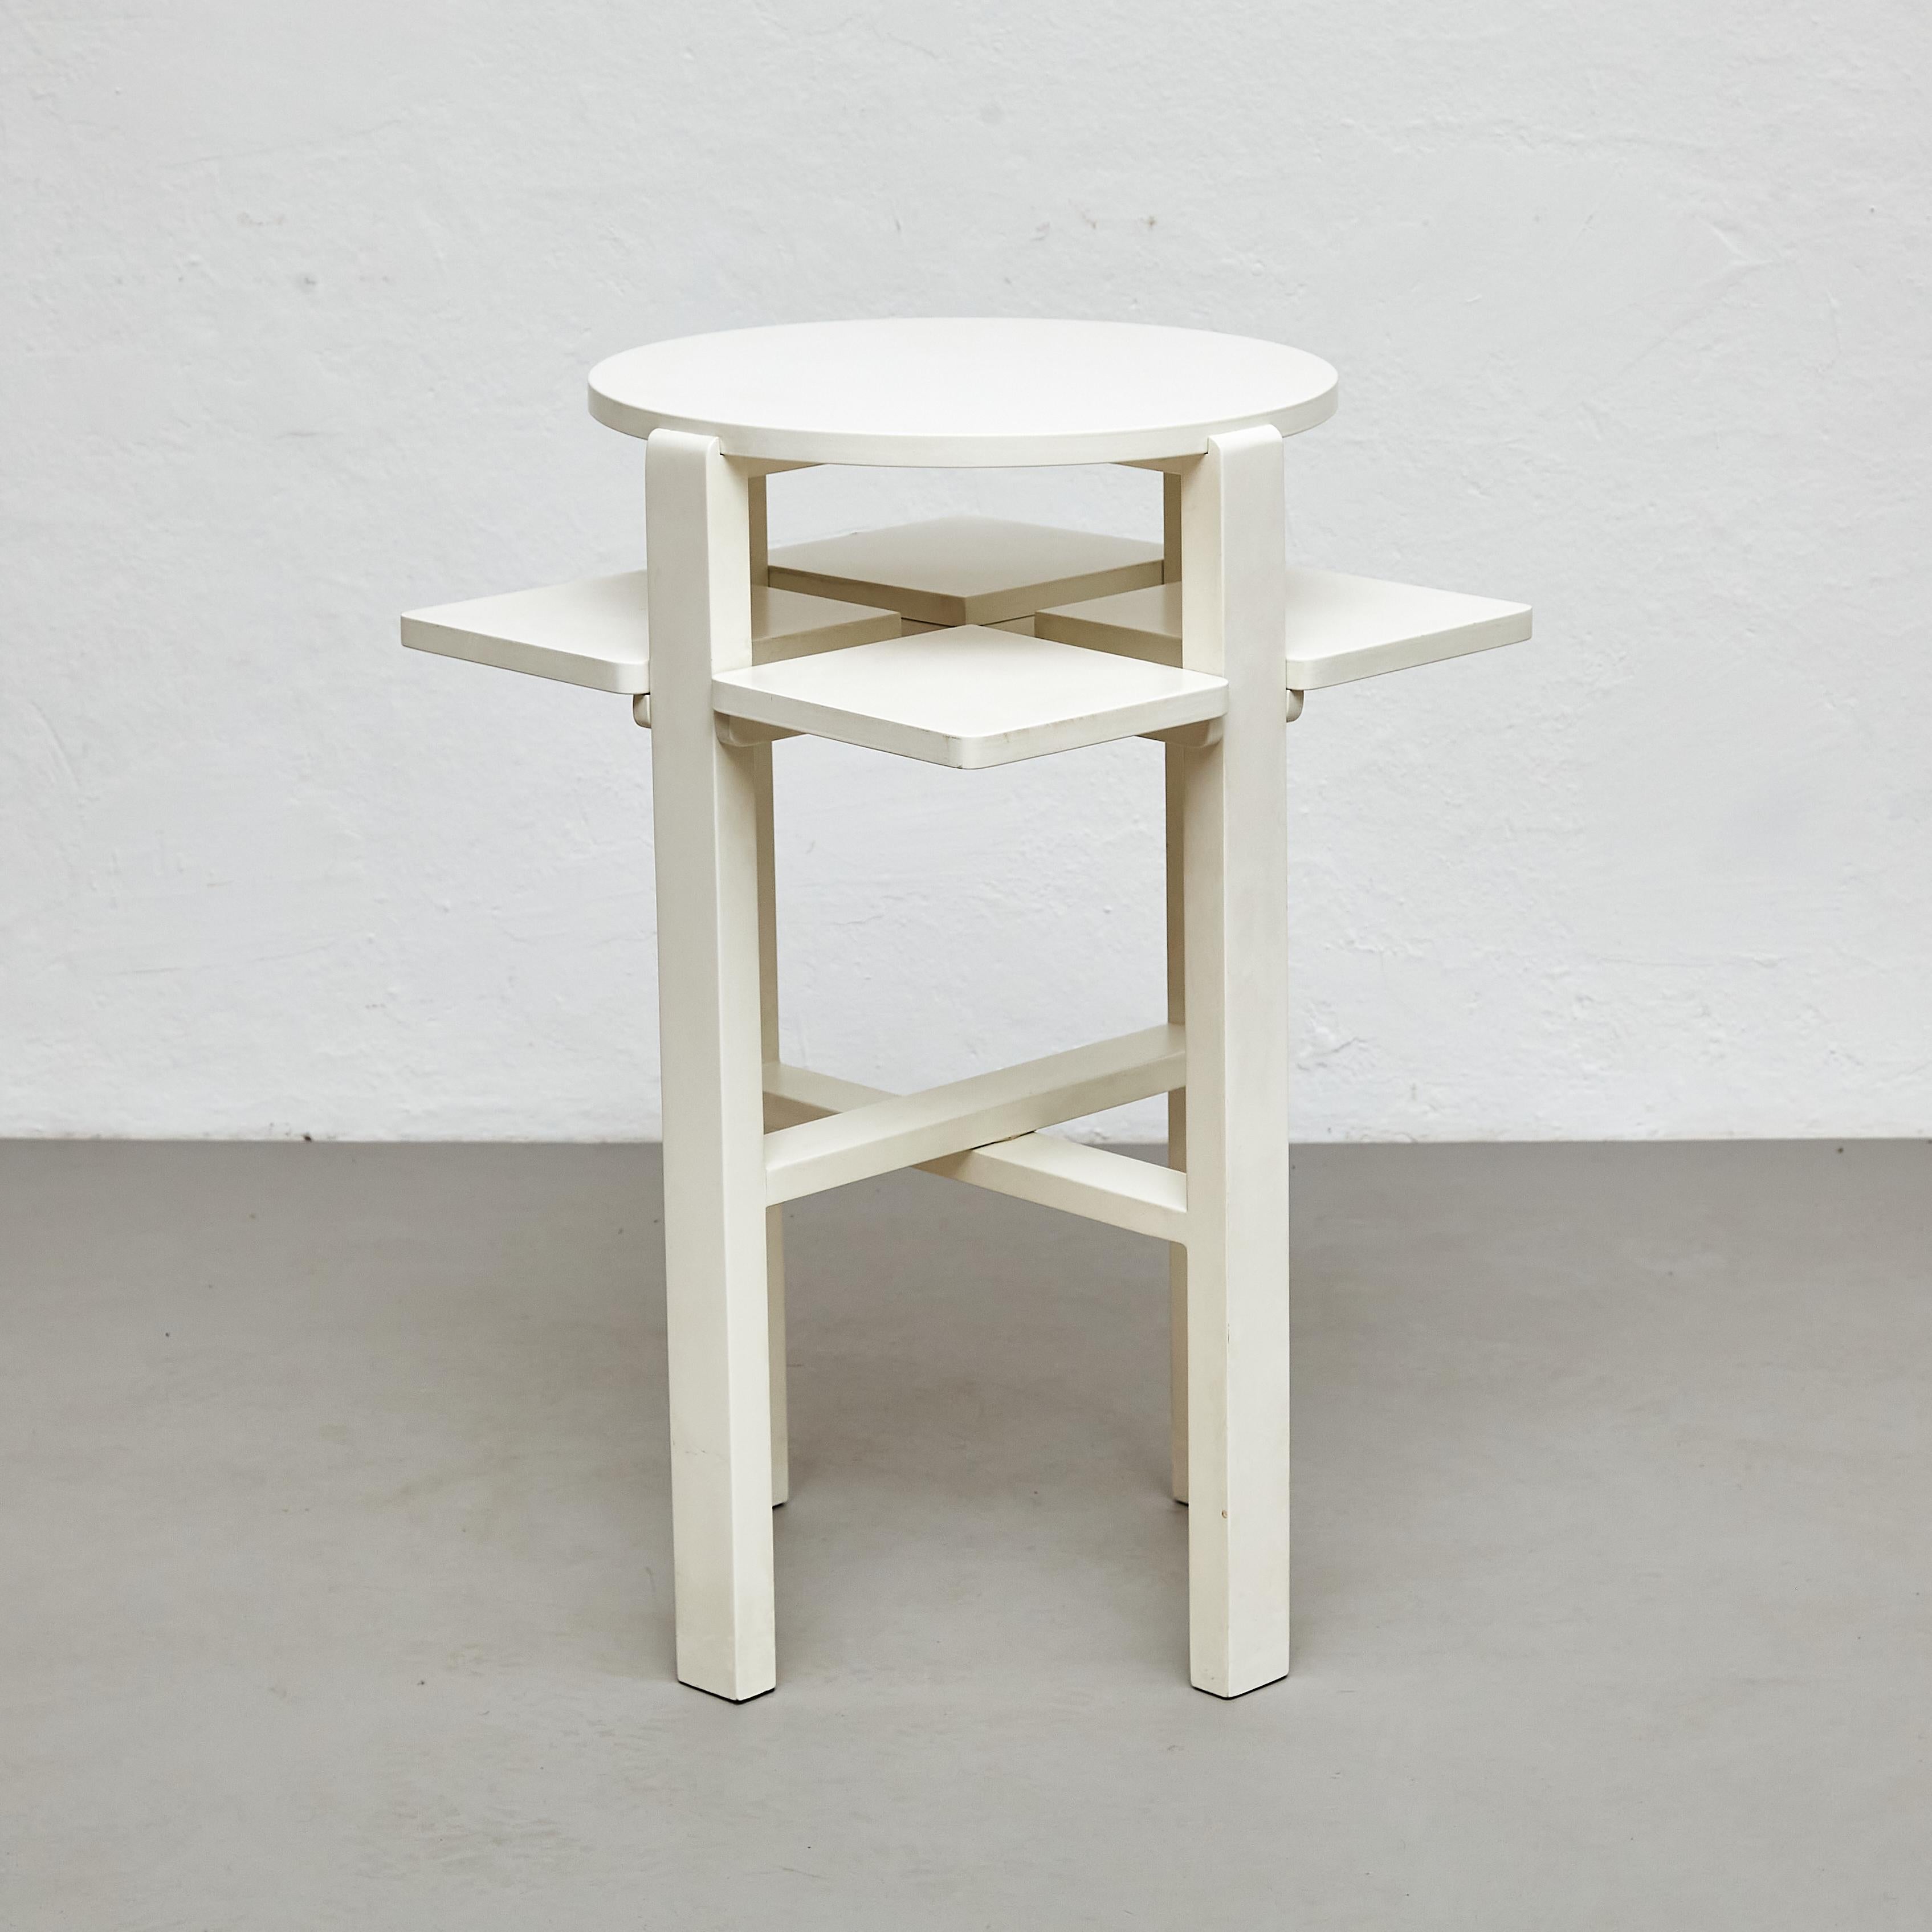 Wood Charles Rennie Mackintosh White Lacquered Domino Side Table, circa 1970